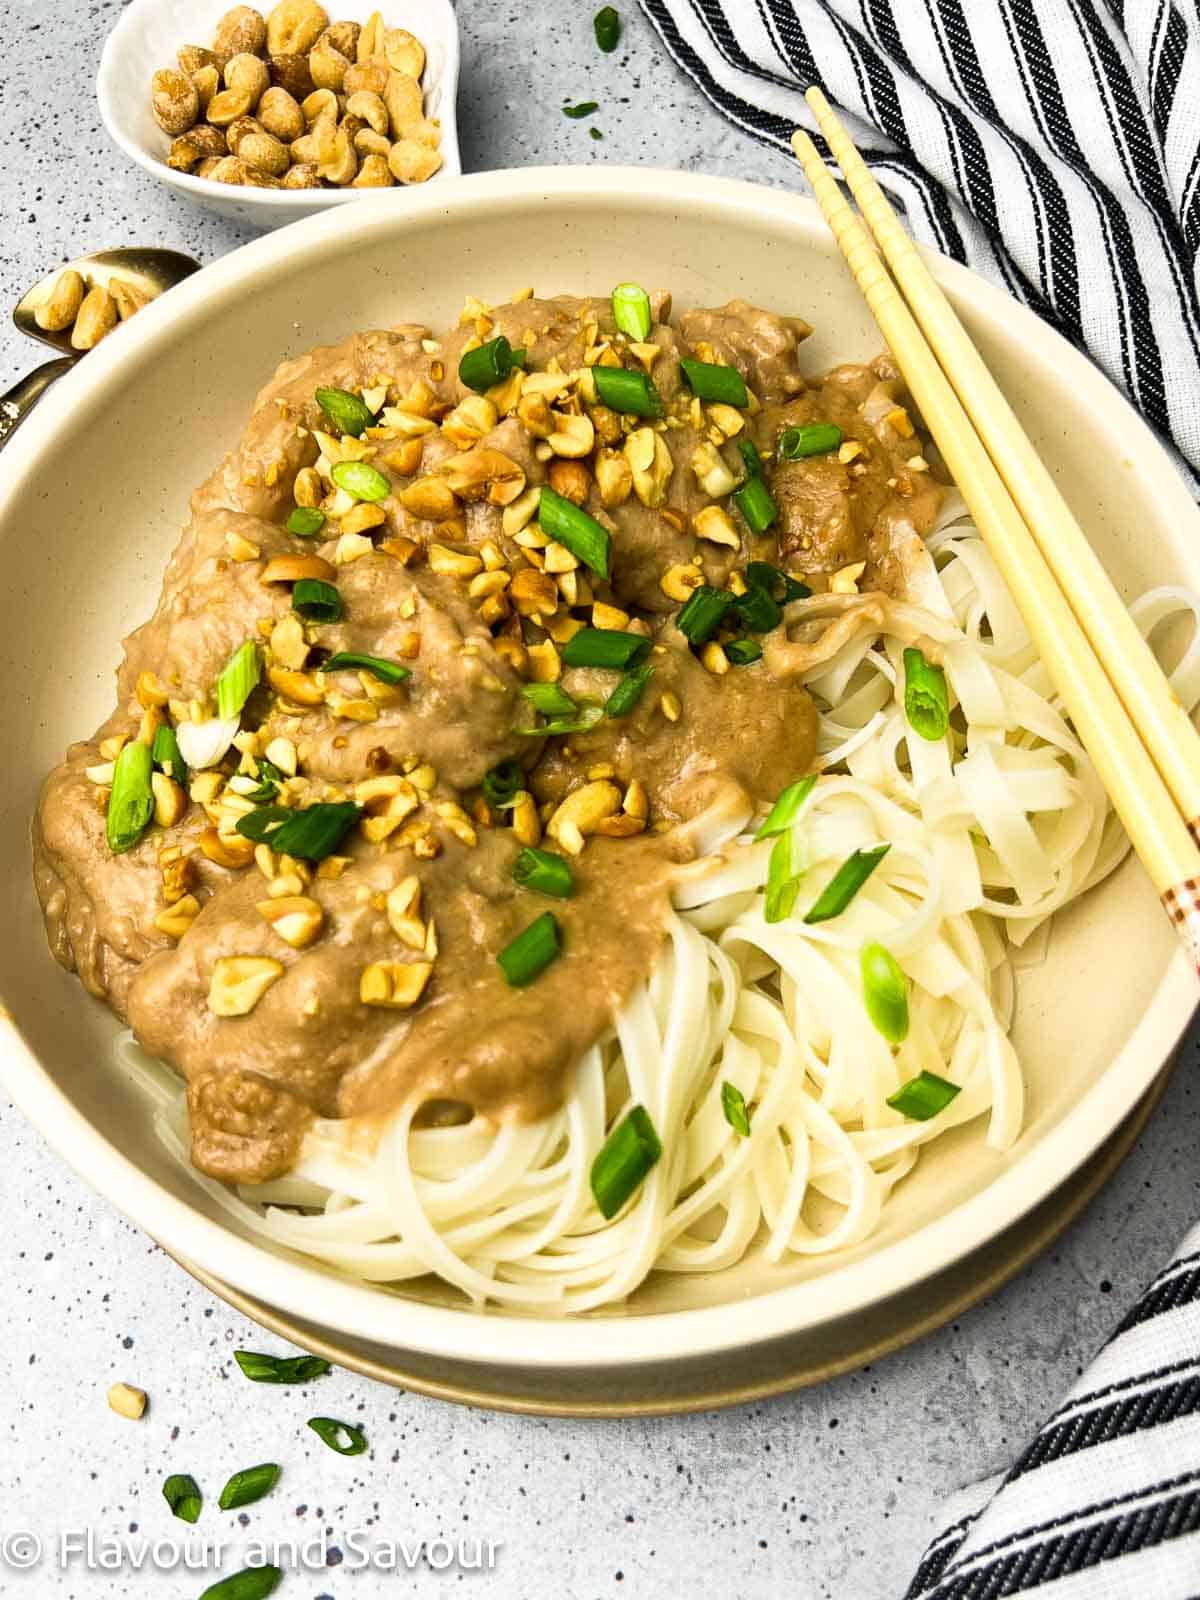 Thai peanut chicken thighs with rice noodles in a bowl, garnished with chopped salted peanuts and sliced green onions.